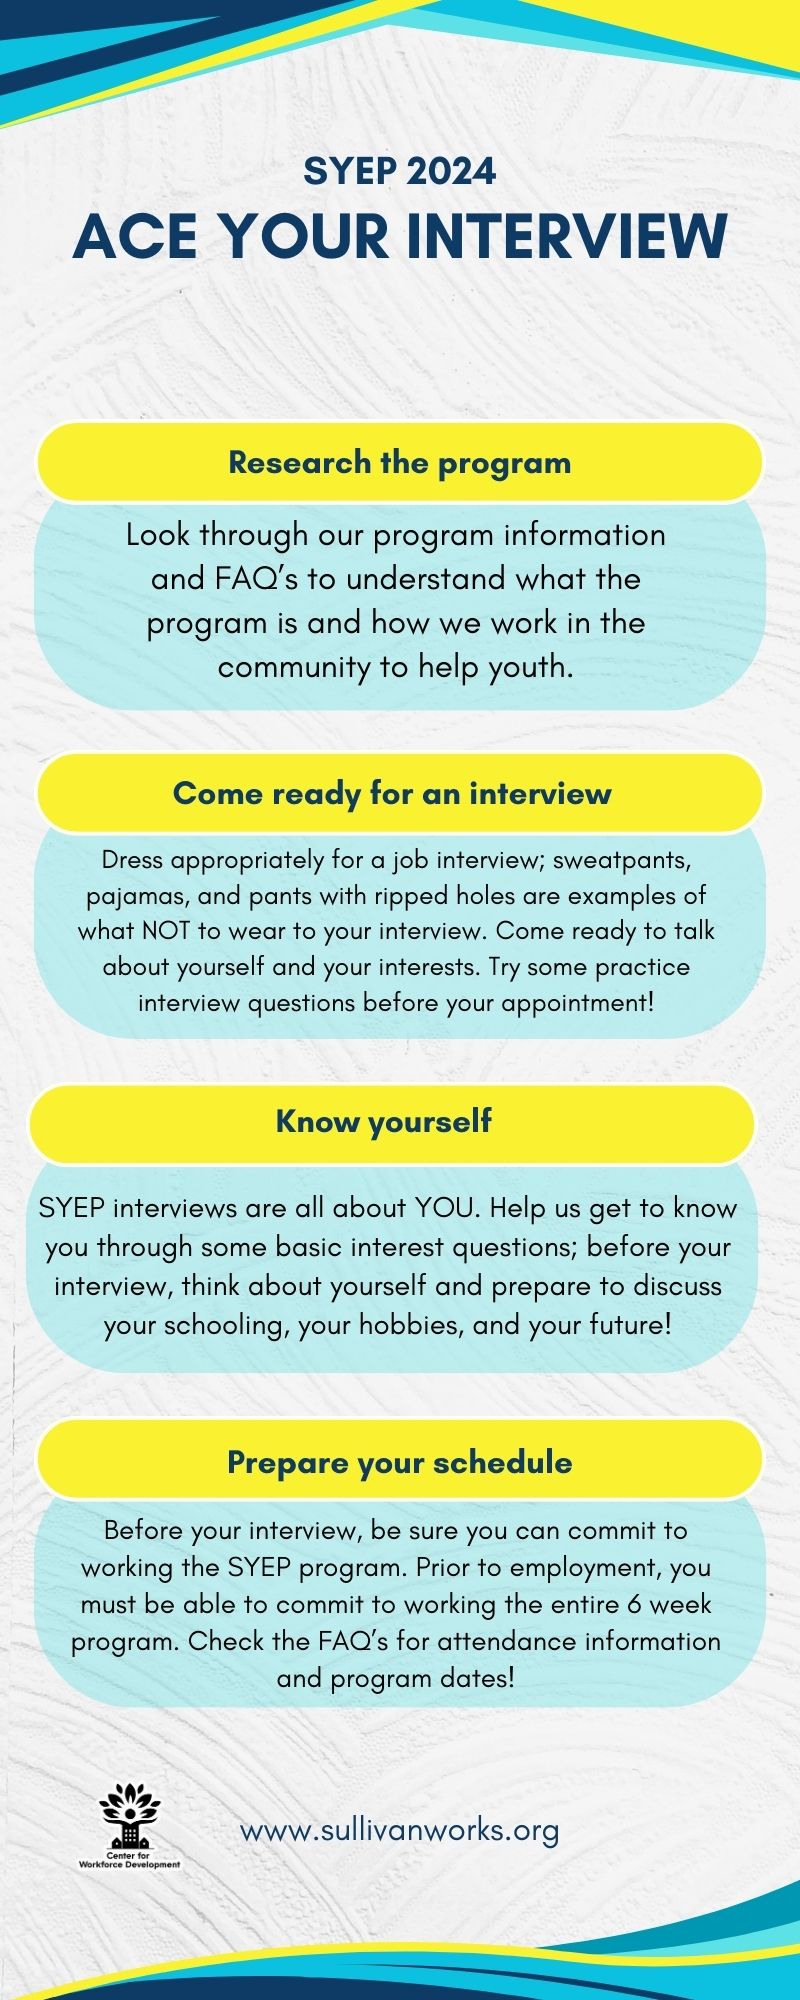 Interview Tips infographic